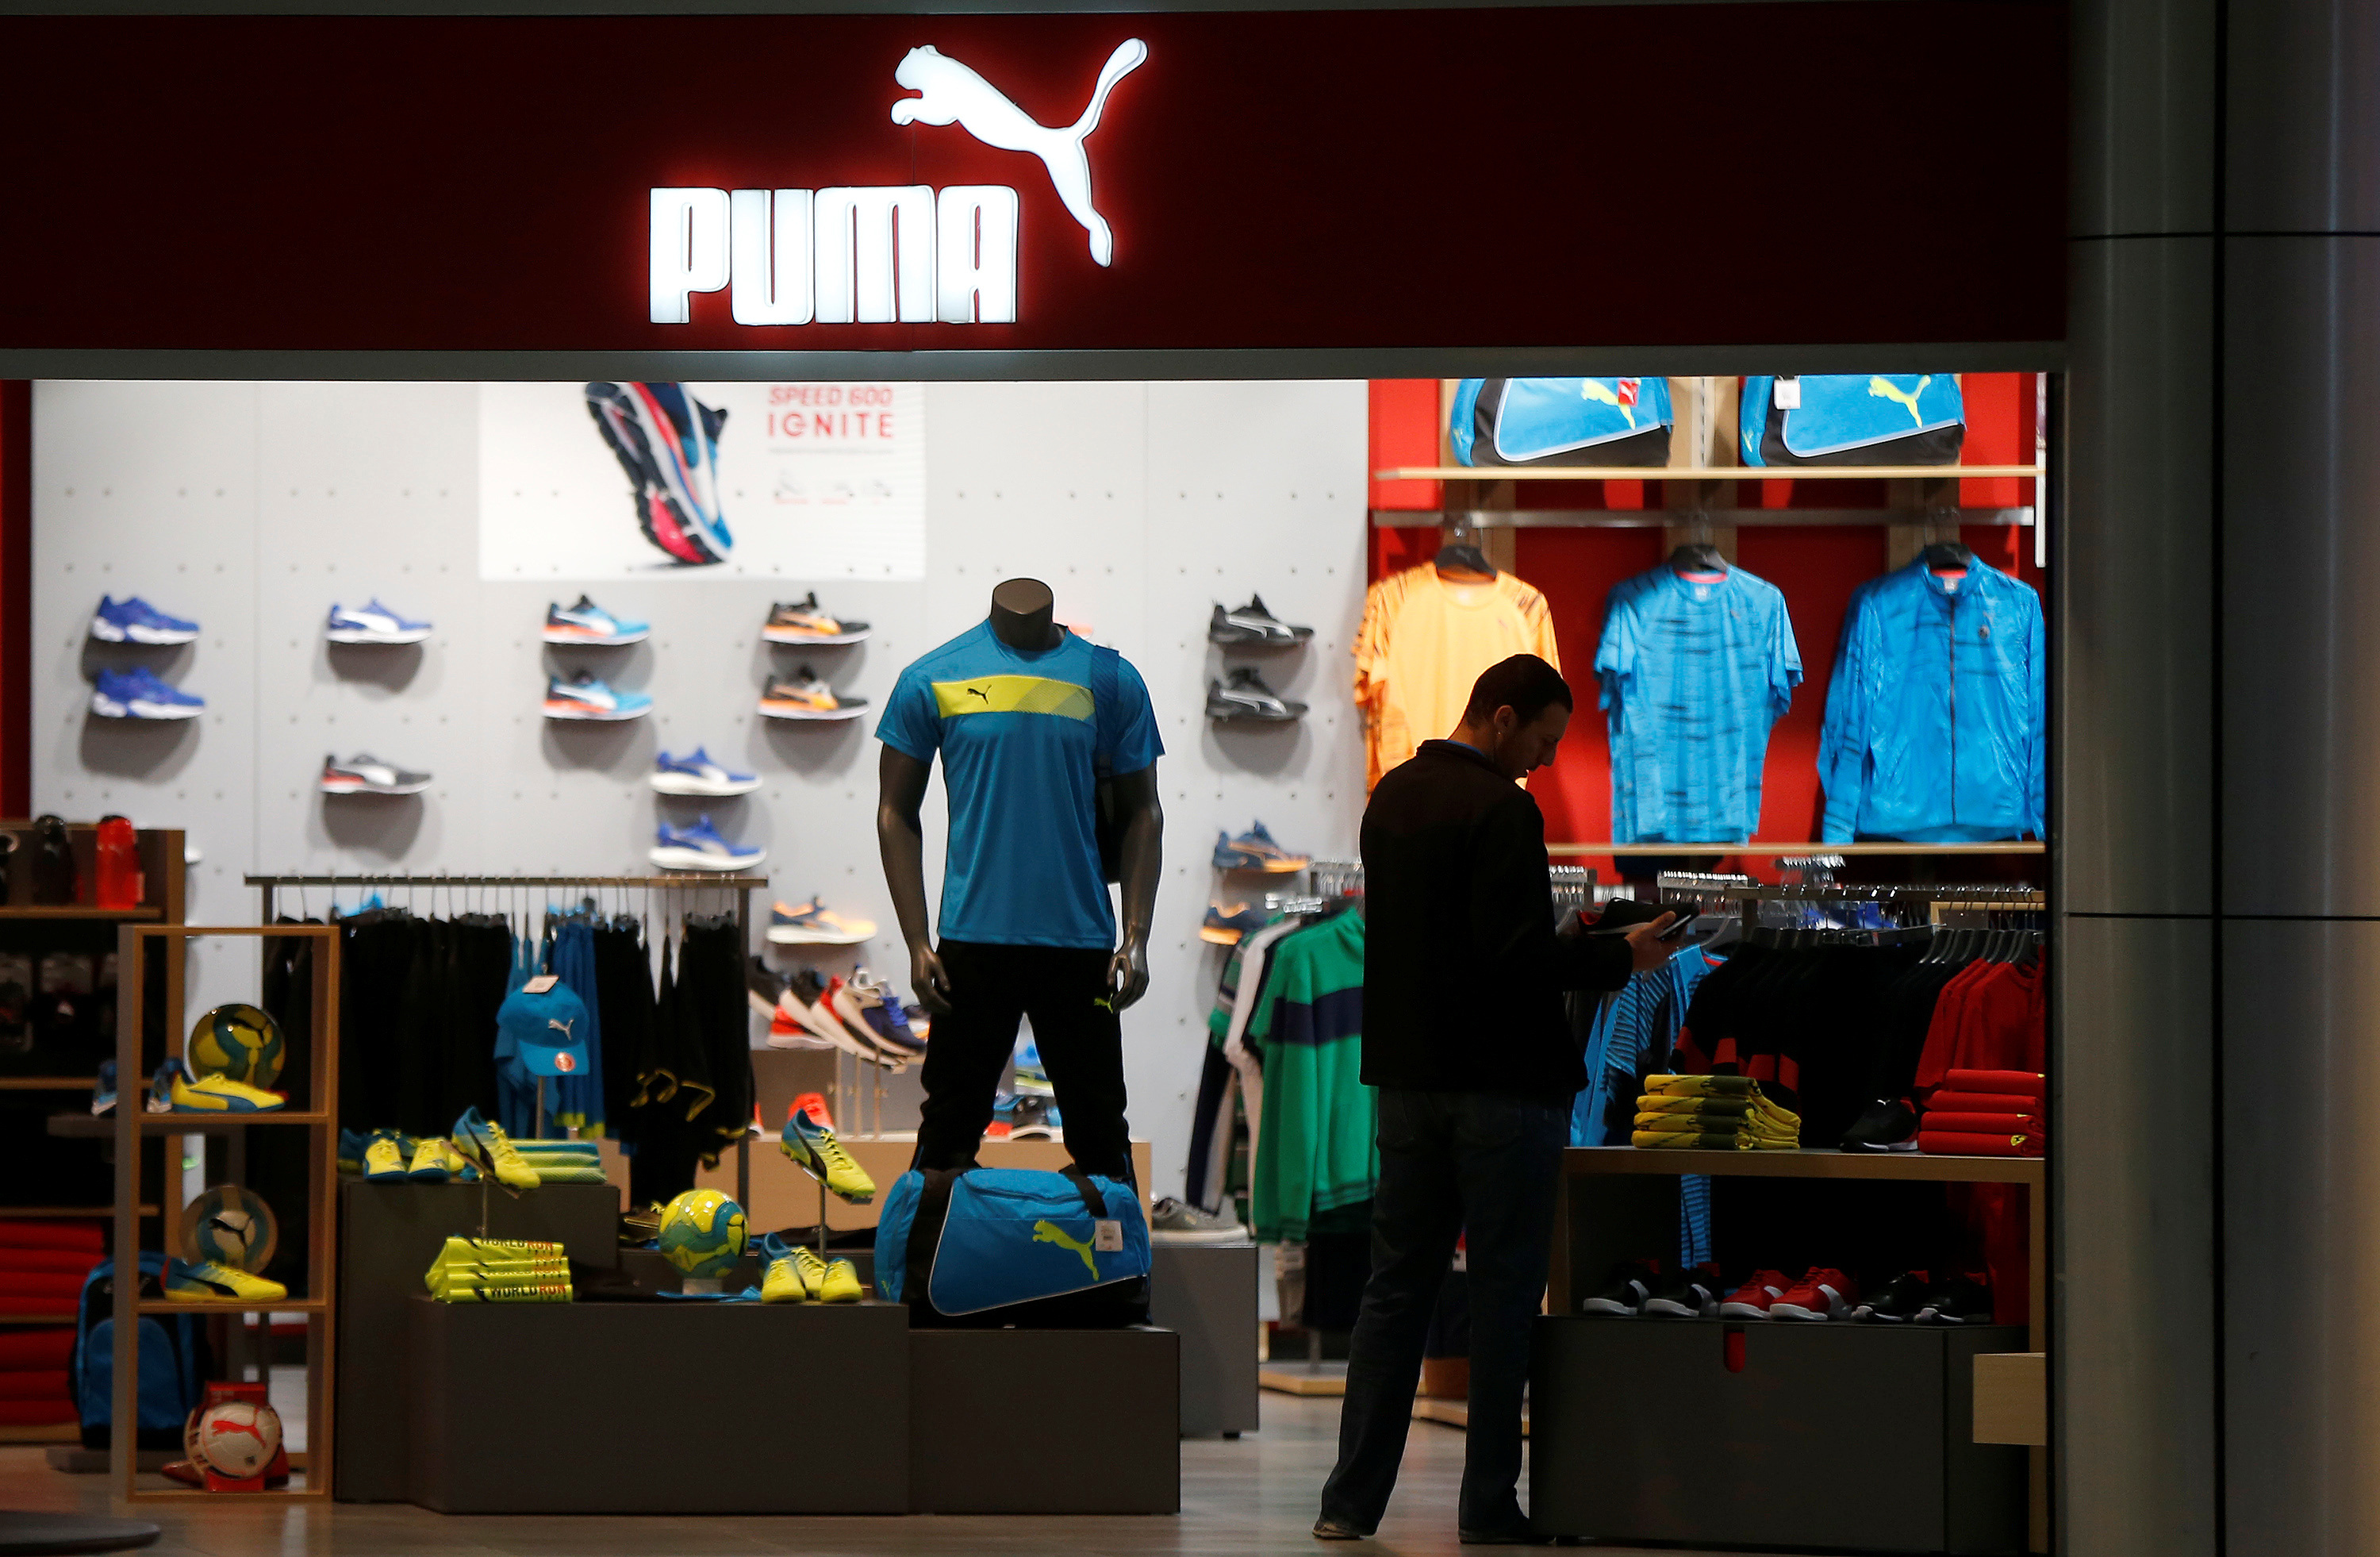 Puma aims to boost its brand in 'challenging' market